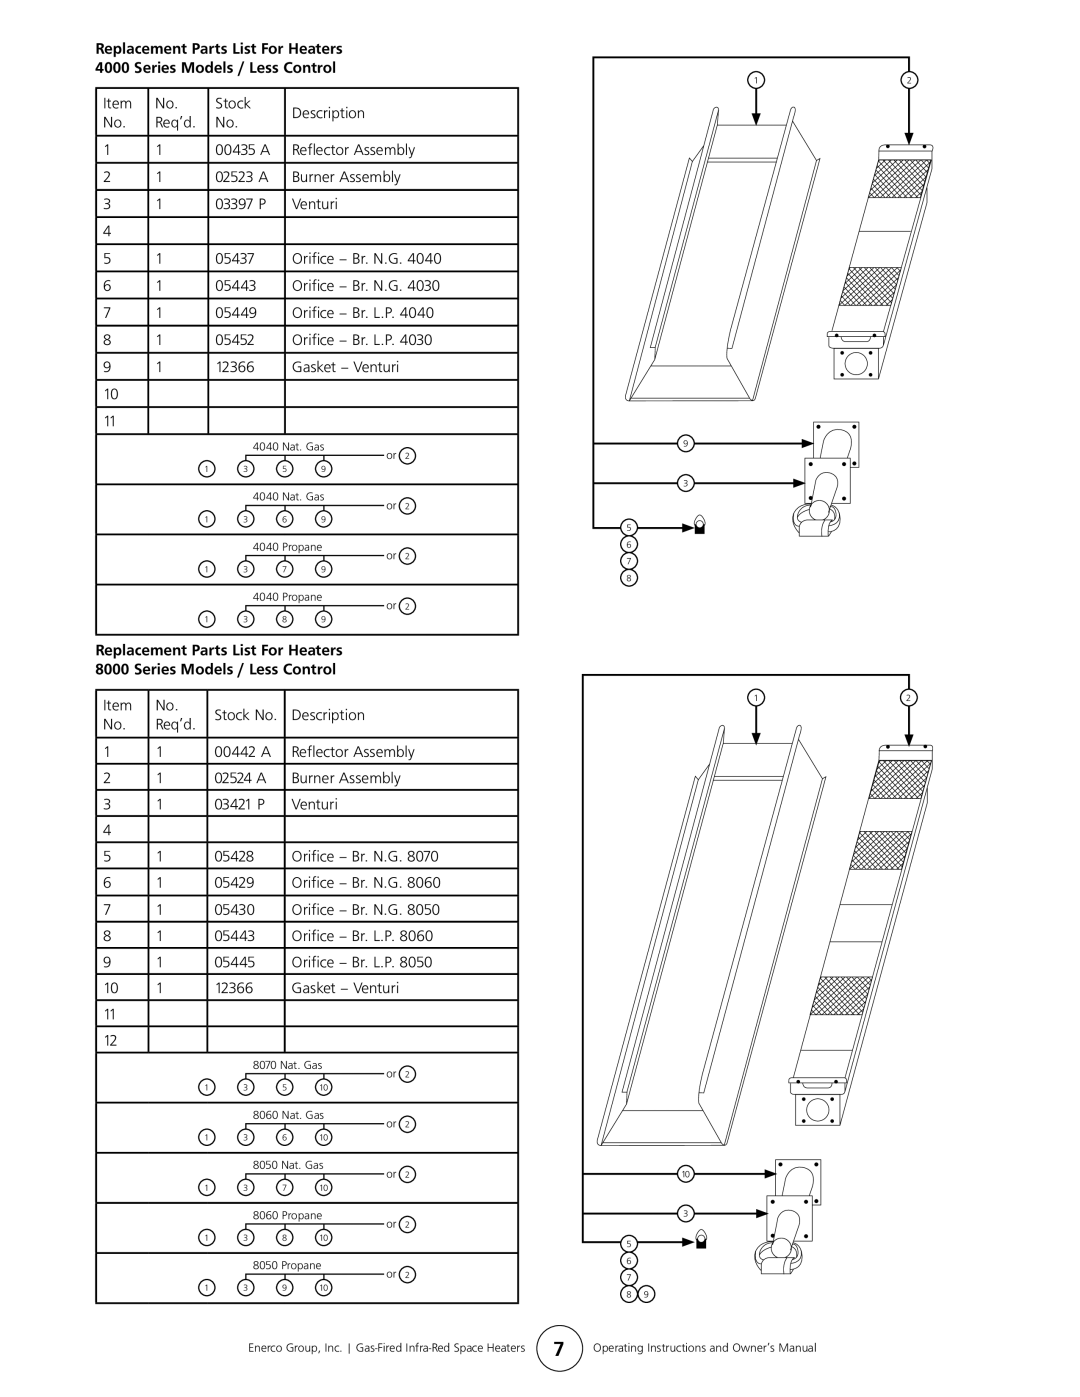 Enerco HS9120, HS4040, HS8060, HS9100S owner manual Replacement Parts List For Heaters, Series Models / Less Control 